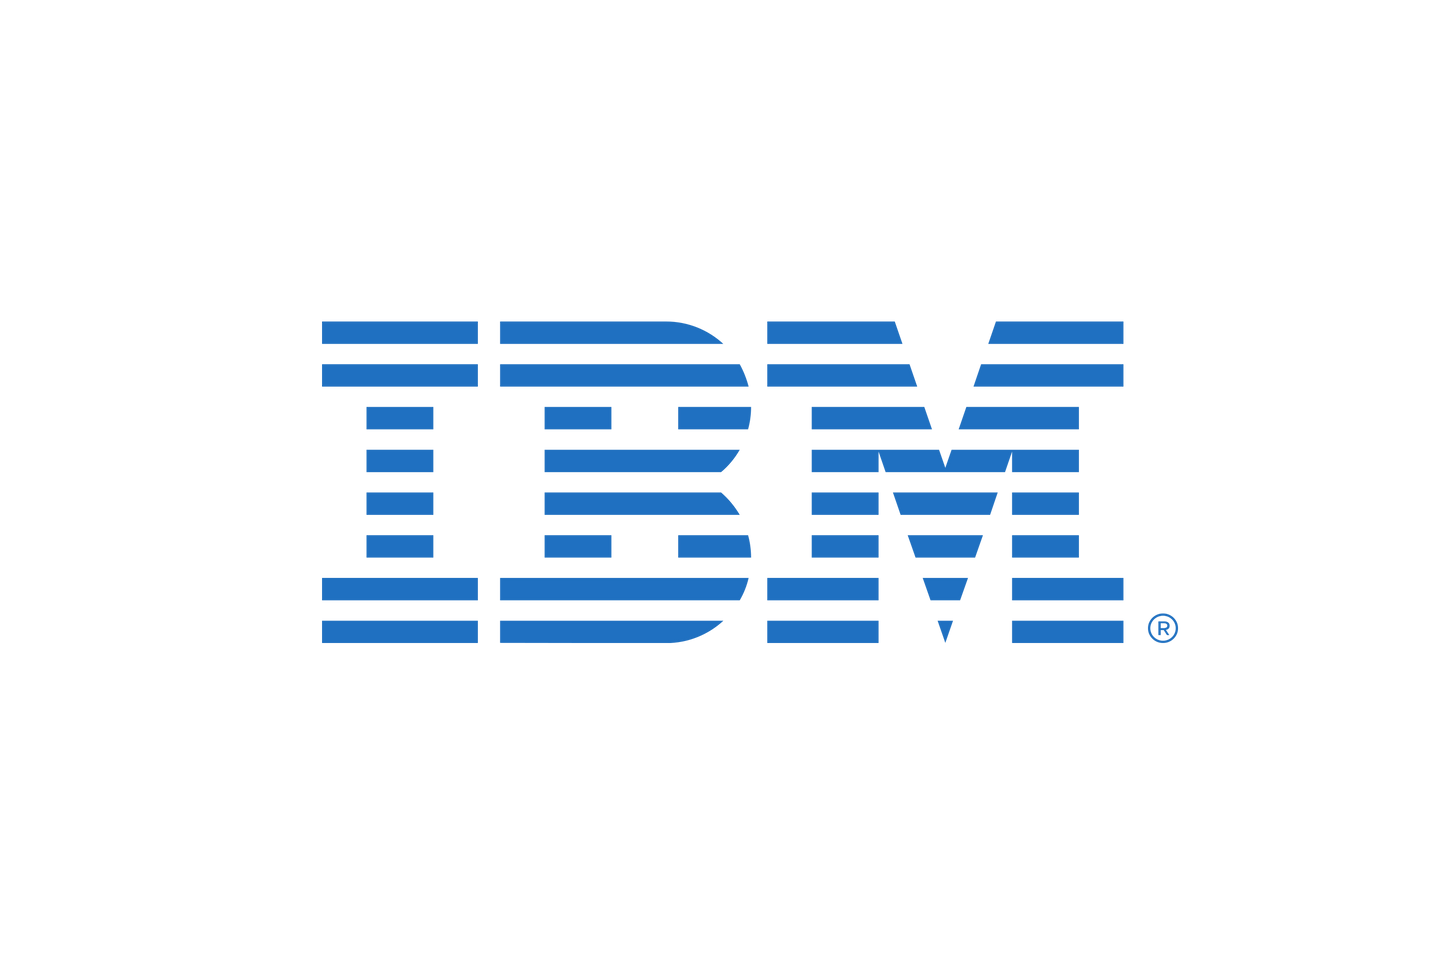 IBM Planning Analytics Express Connector for Cognos Analytics per Install Monthly License